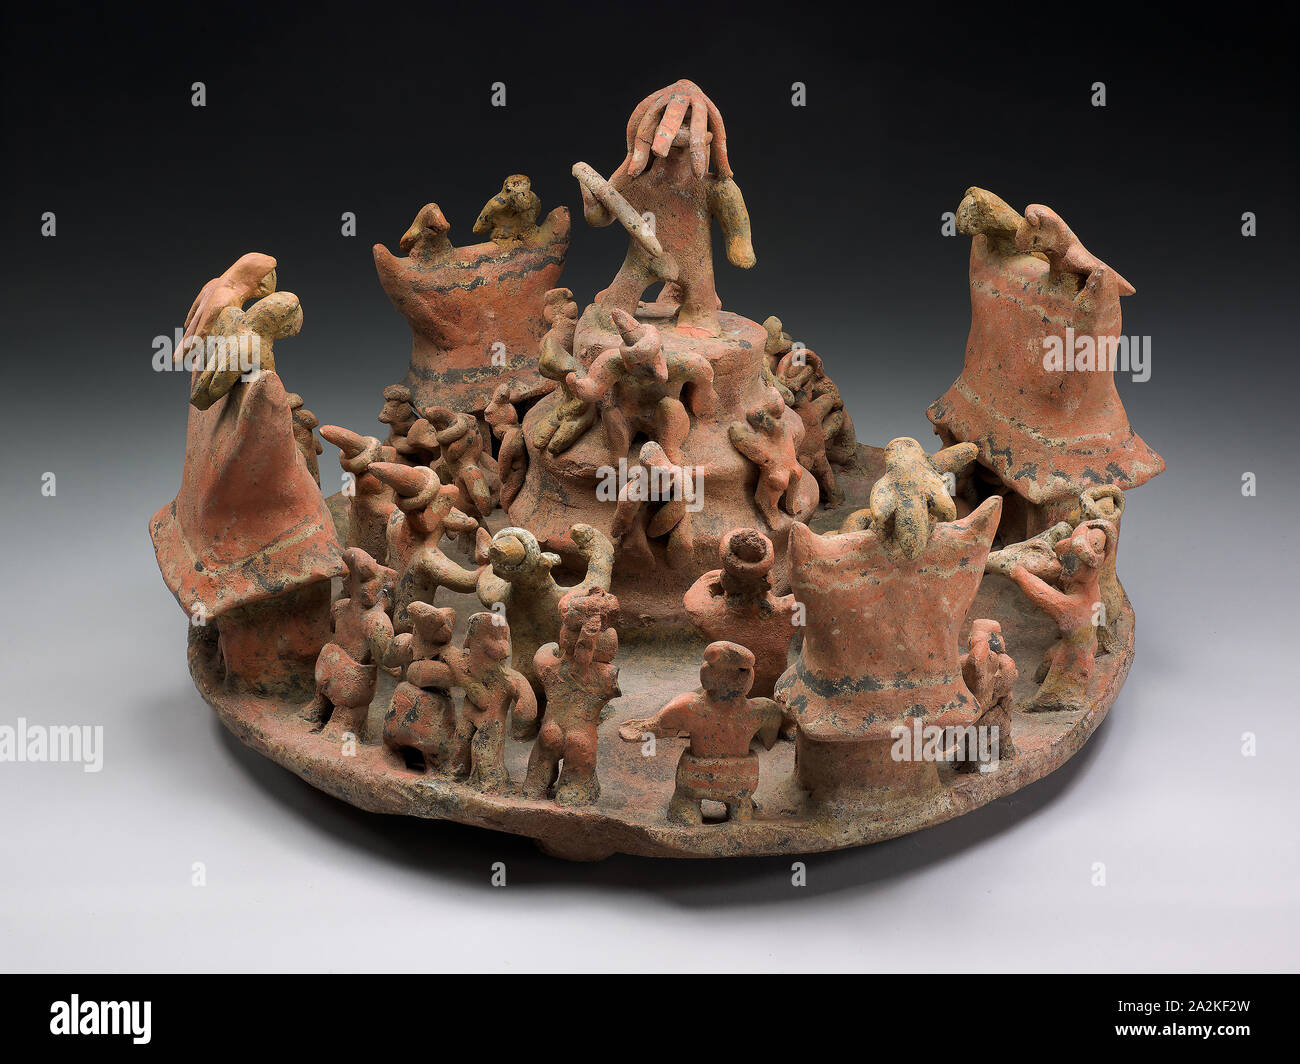 Model Depicting a Ritual Center, A.D. 100/800, Nayarit, Ixtlán del Río, Nayarit, Mexico, Nayarit state, Ceramic and pigment, 33 × 47 cm (13 × 18 1/2 in Stock Photo